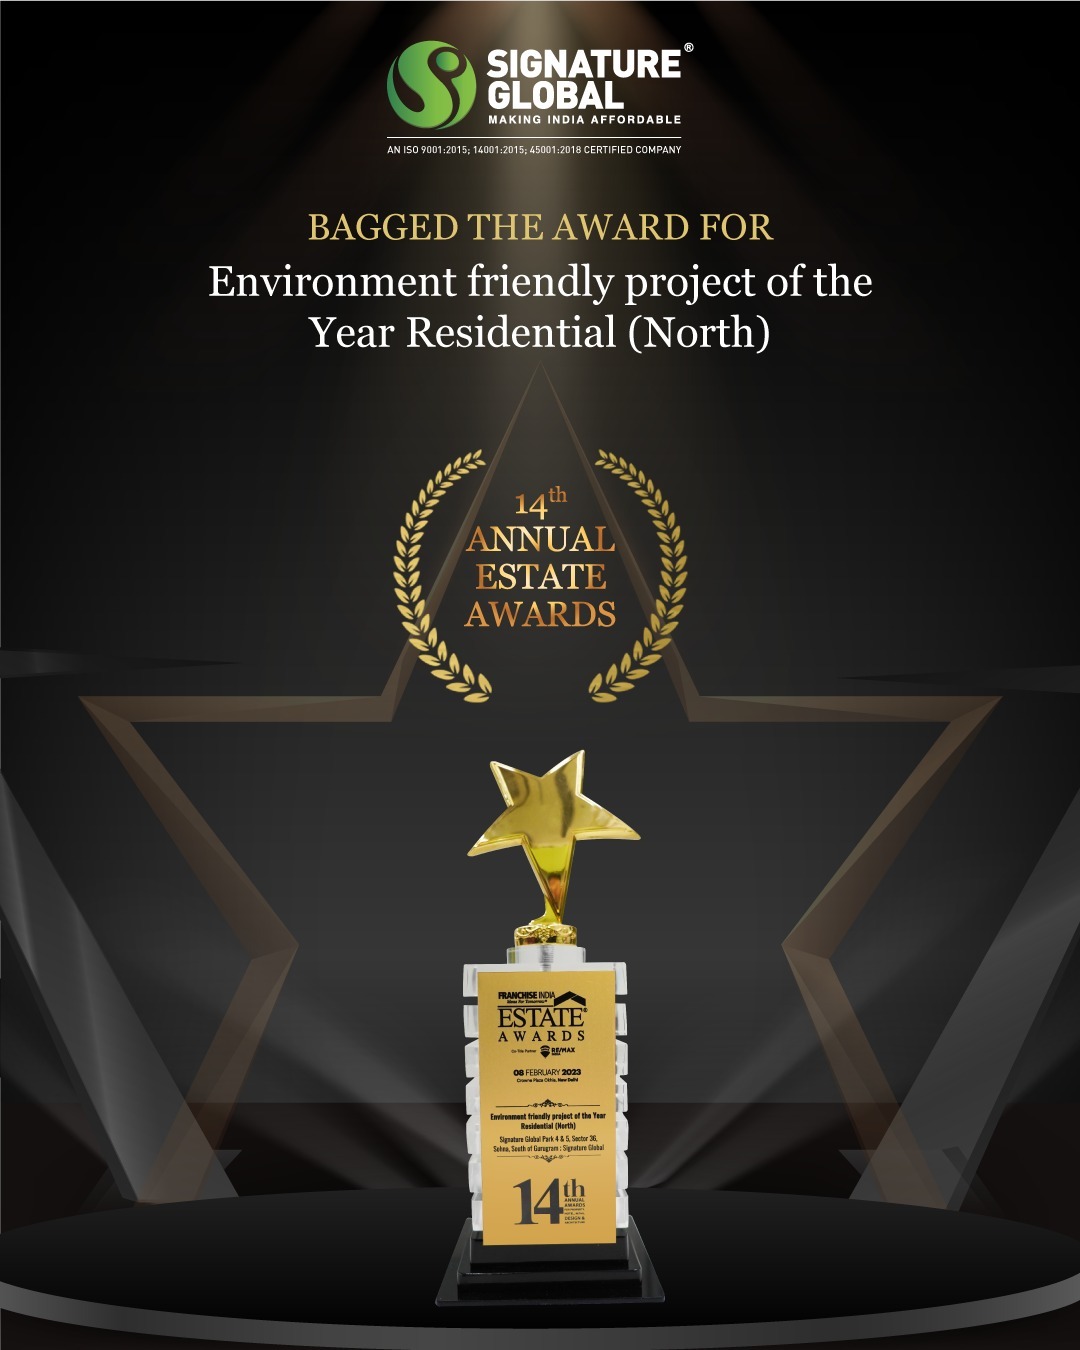 Signature Global Bagged The Award For Environment friendly project of the Year Residential (North)